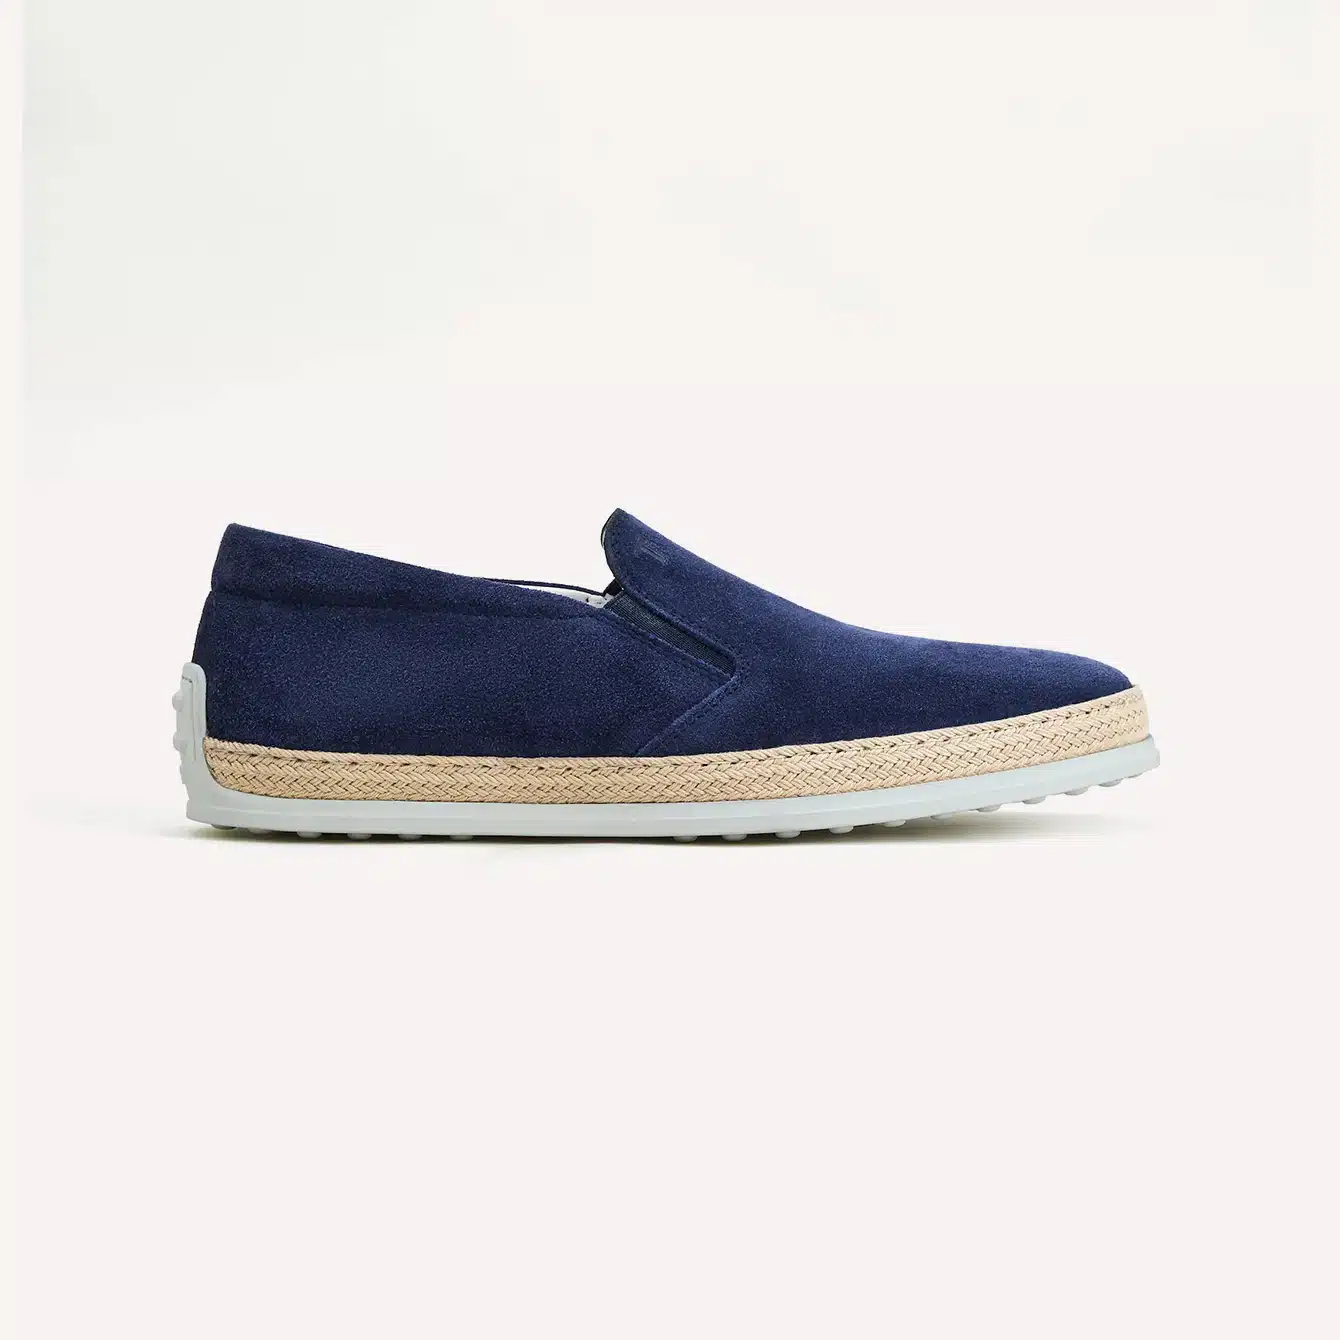 Tods Slip On Shoes in Suede